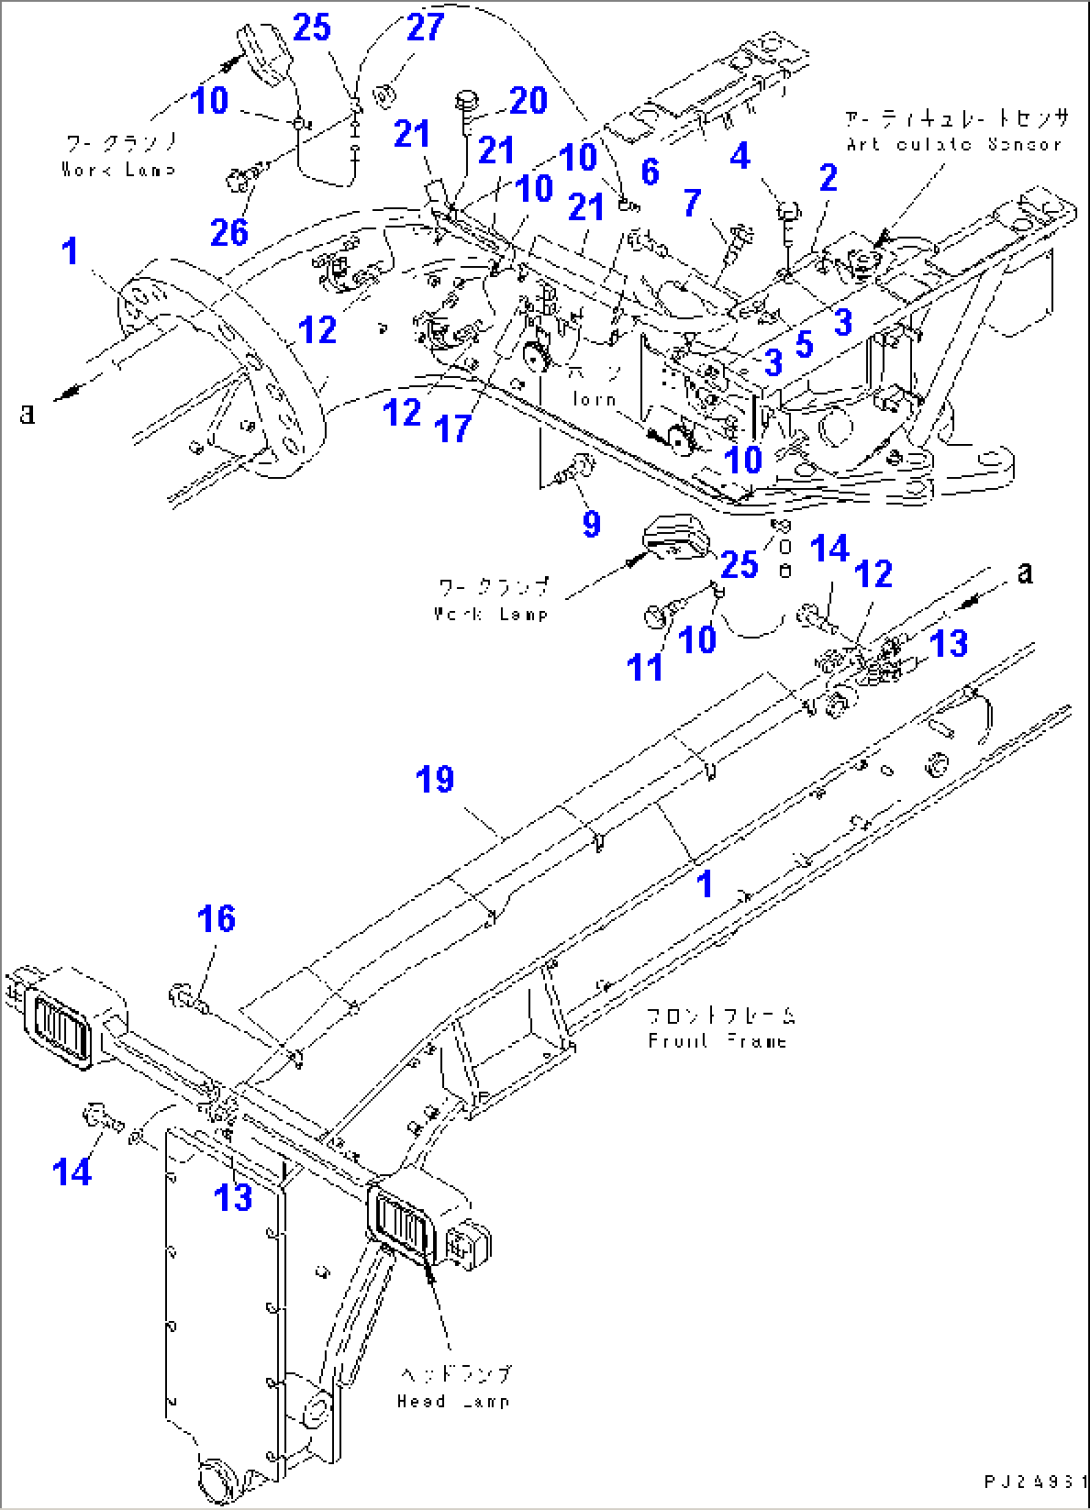 FRONT FRAME HARNESS(#50001-51000)